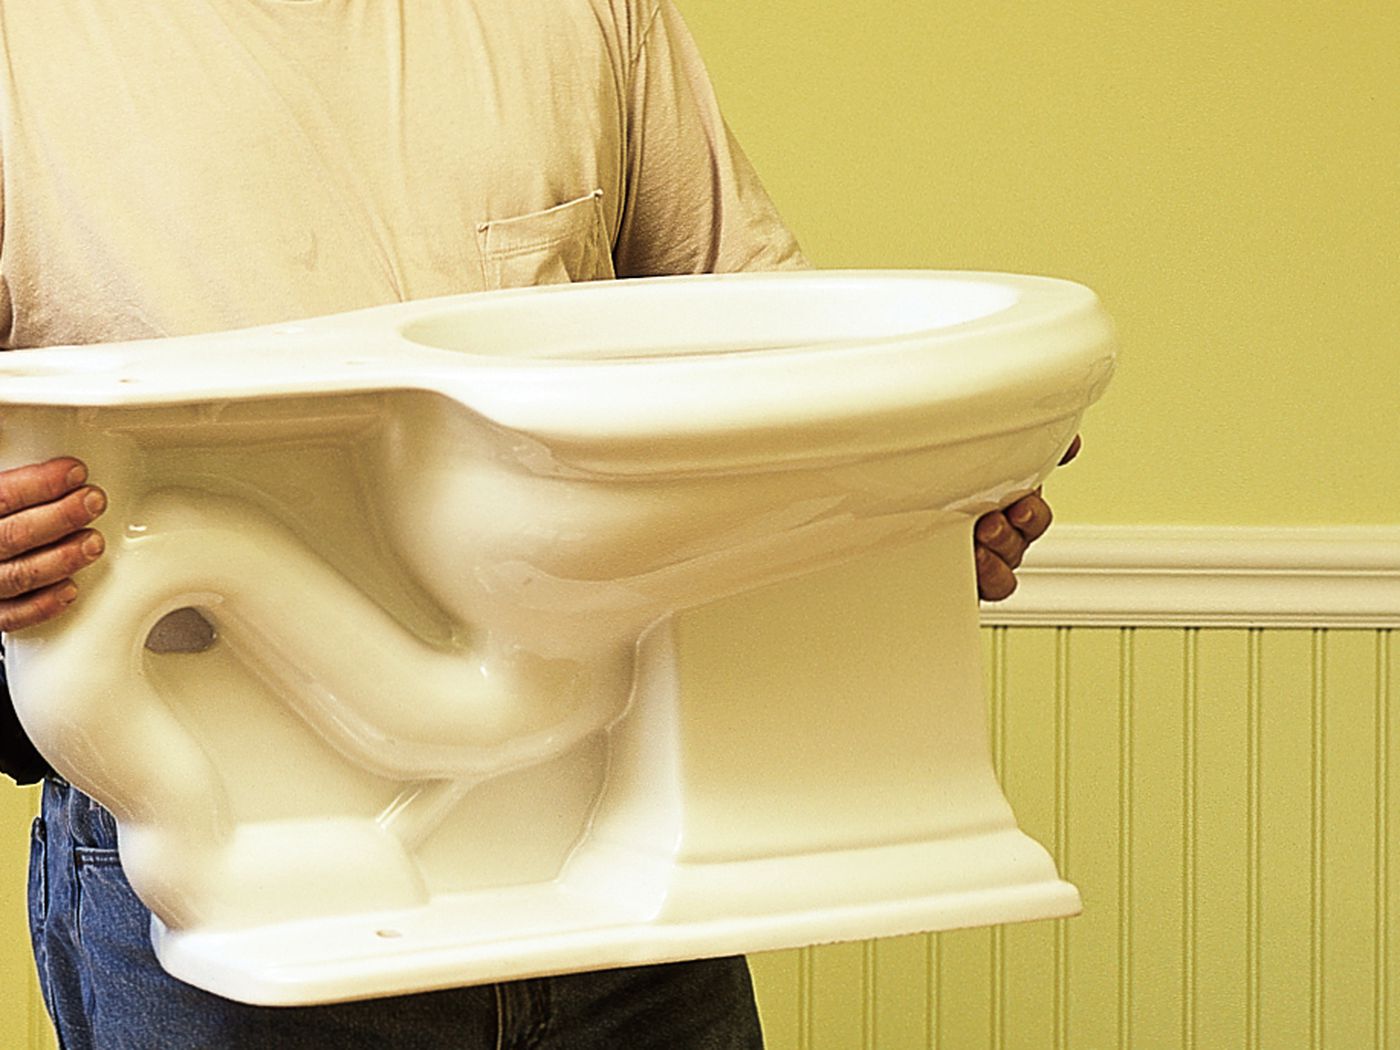 How to fix the running toilet